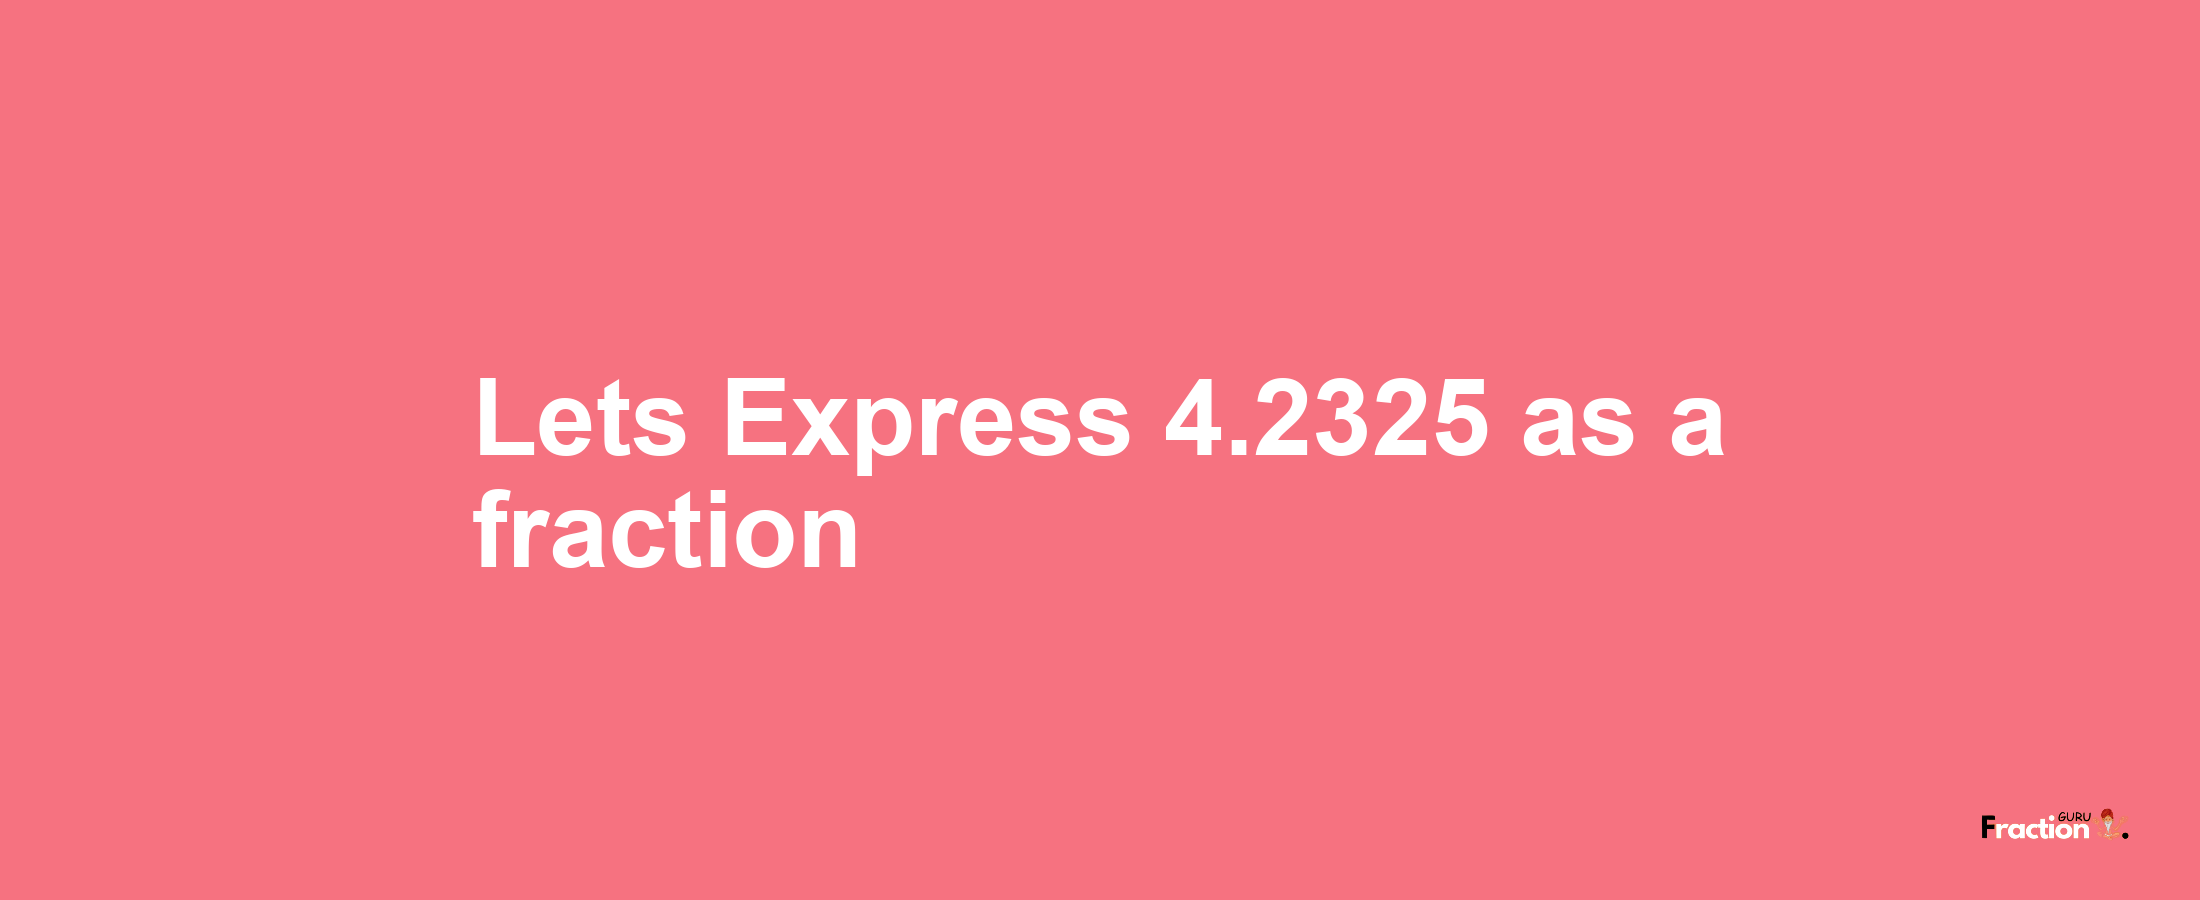 Lets Express 4.2325 as afraction